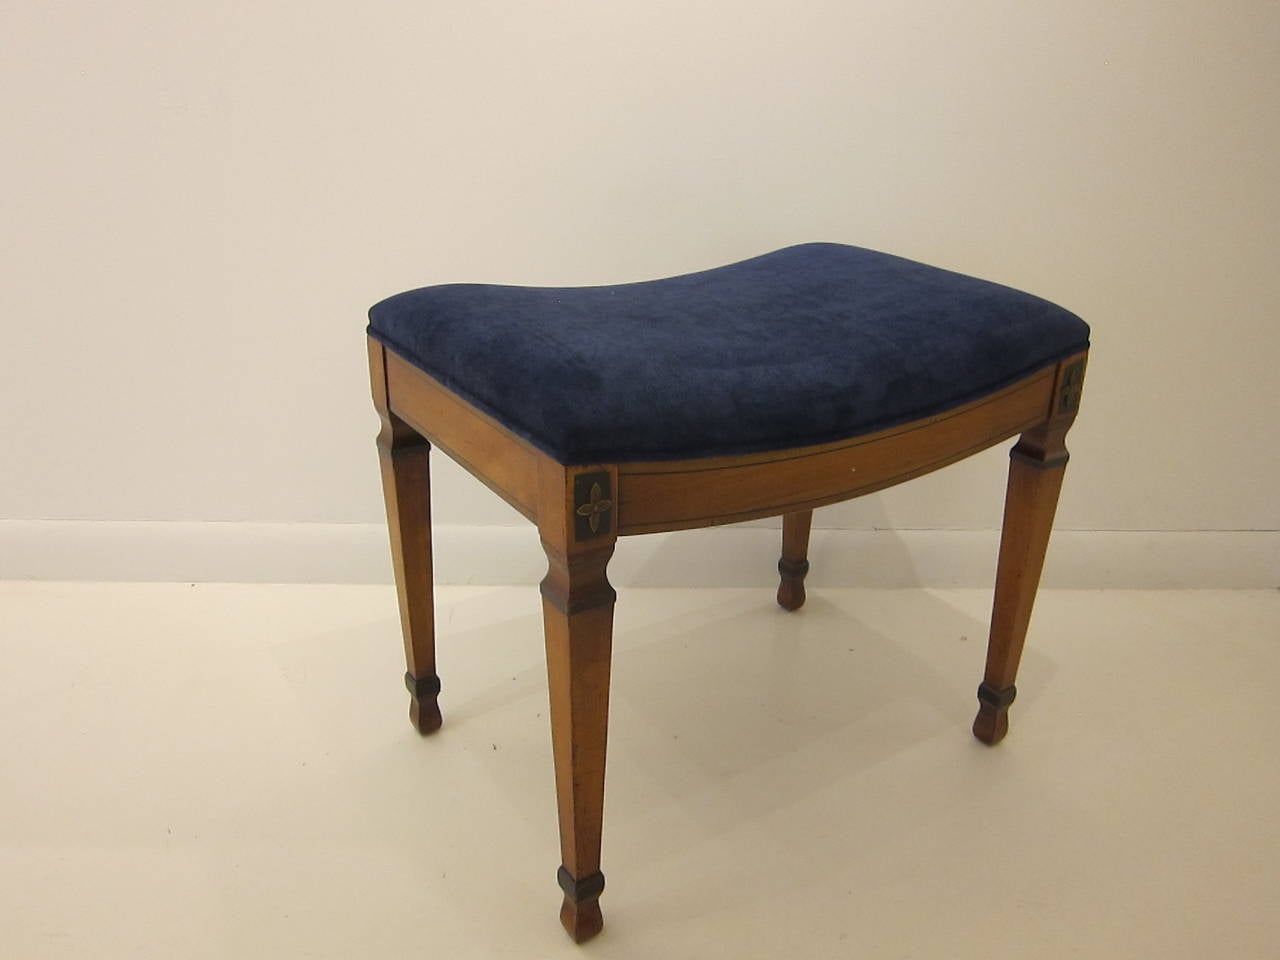 Early 20th century Biedermeier stool. Pear wood with new velvet covering in very good condition.  Tapered legs with carved floret top detail and hour glass feet.   New covering in indigo velvet.  Perfect for sitting, comfortable. 